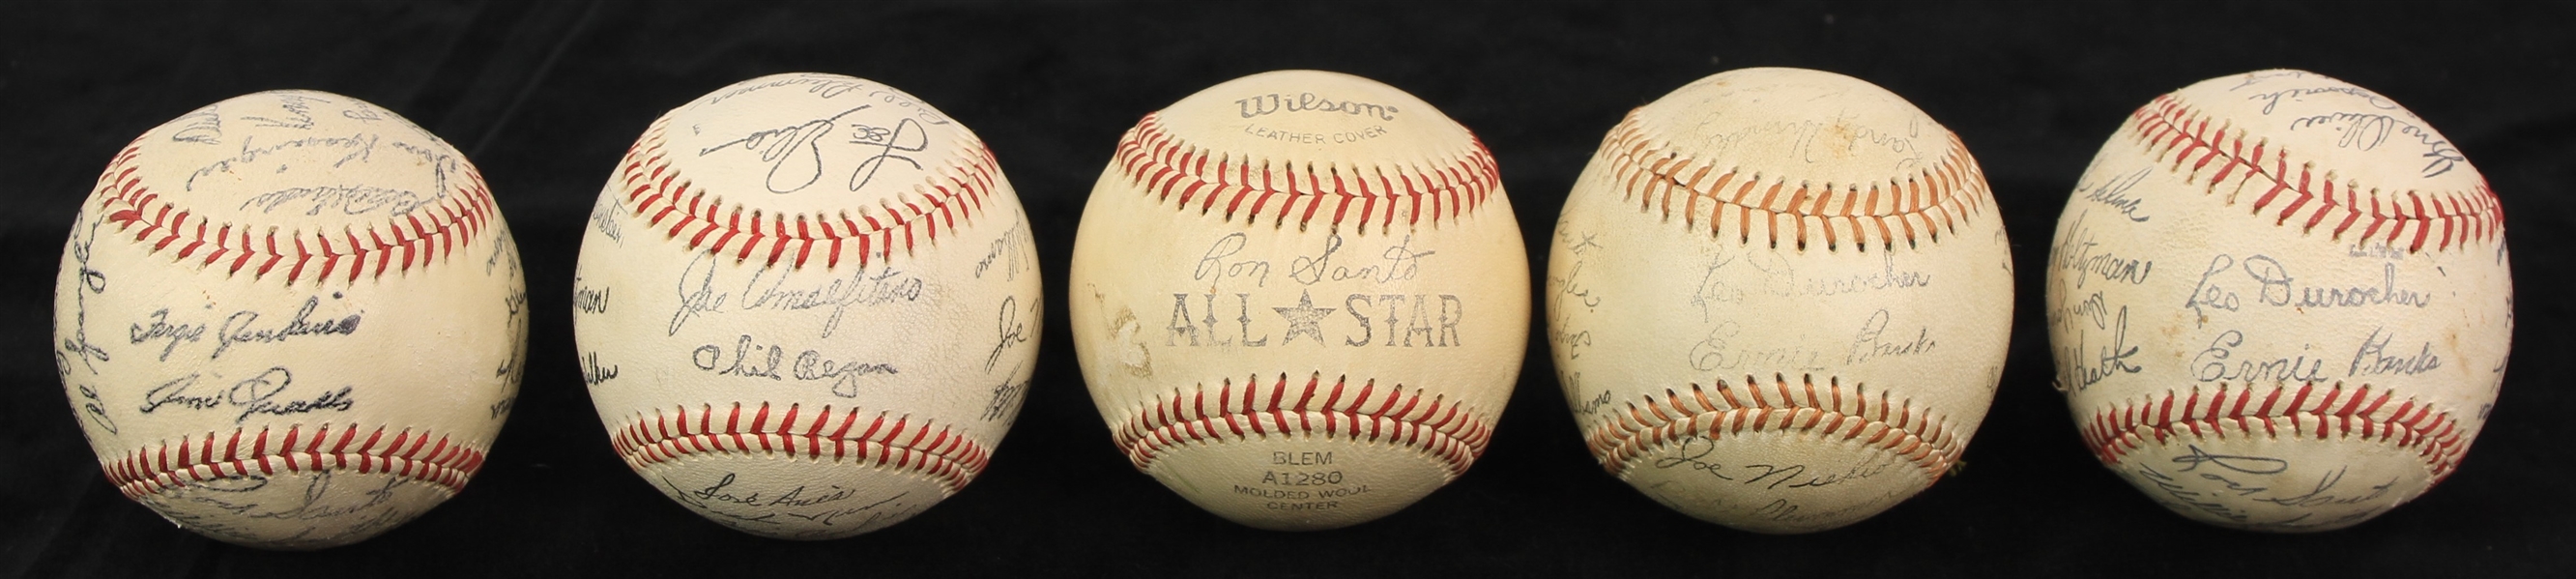 1969 Chicago Cubs Facsimile Stamped Signature Baseballs - Lot of 5 w/ 4 Team Stamped & 1 Ron Santo Wilson All Star